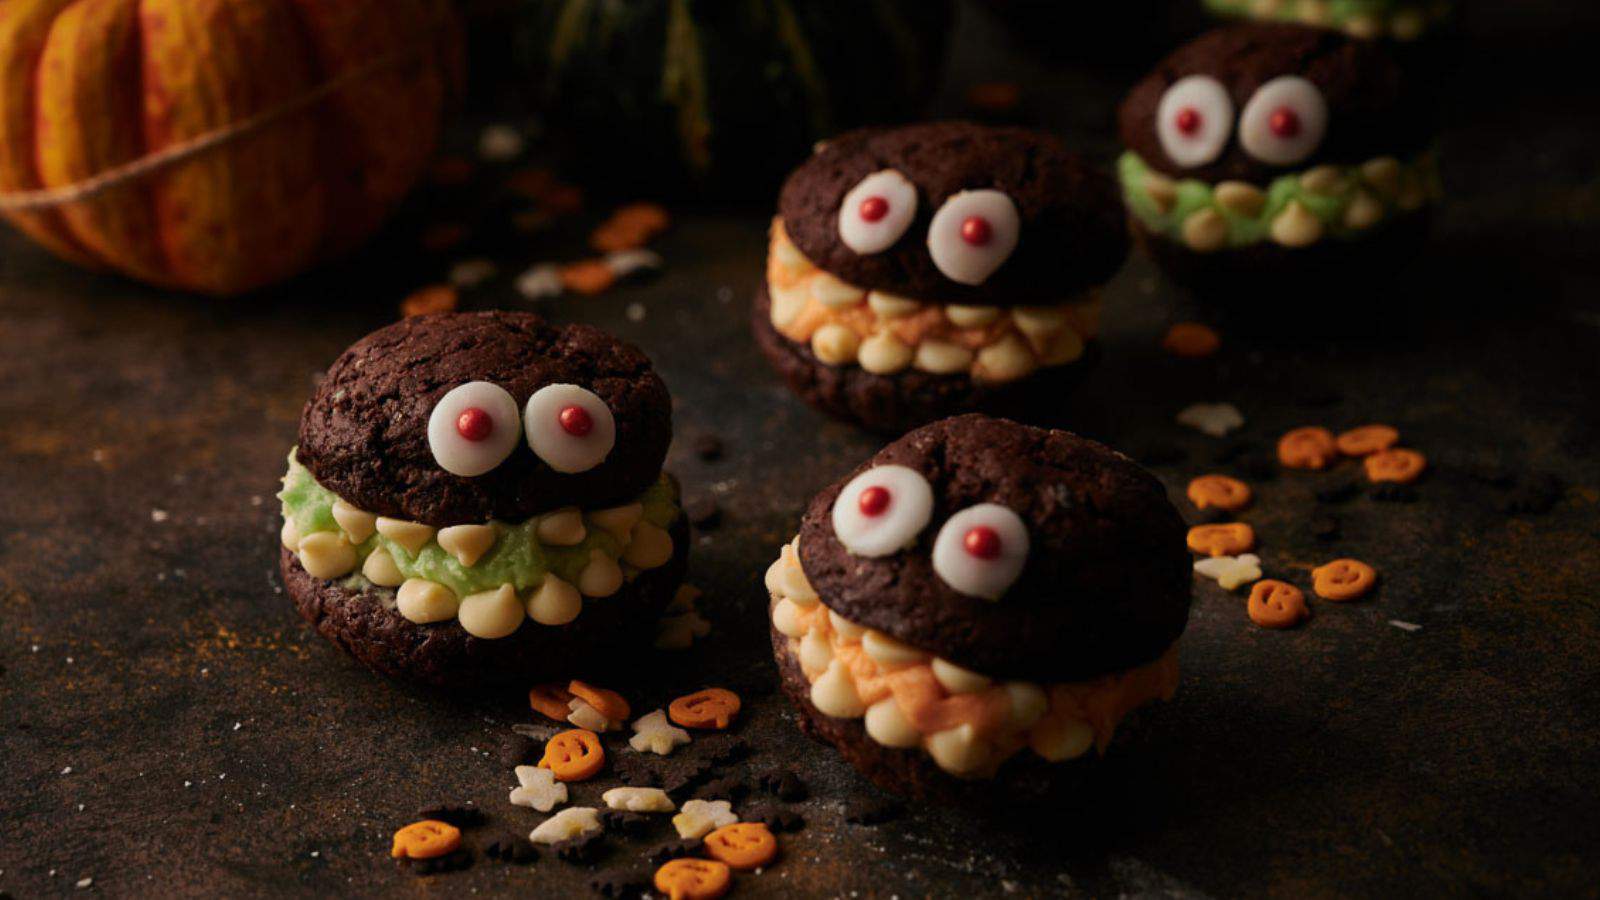 A group of chocolate monster cookies on a table with pumpkins.